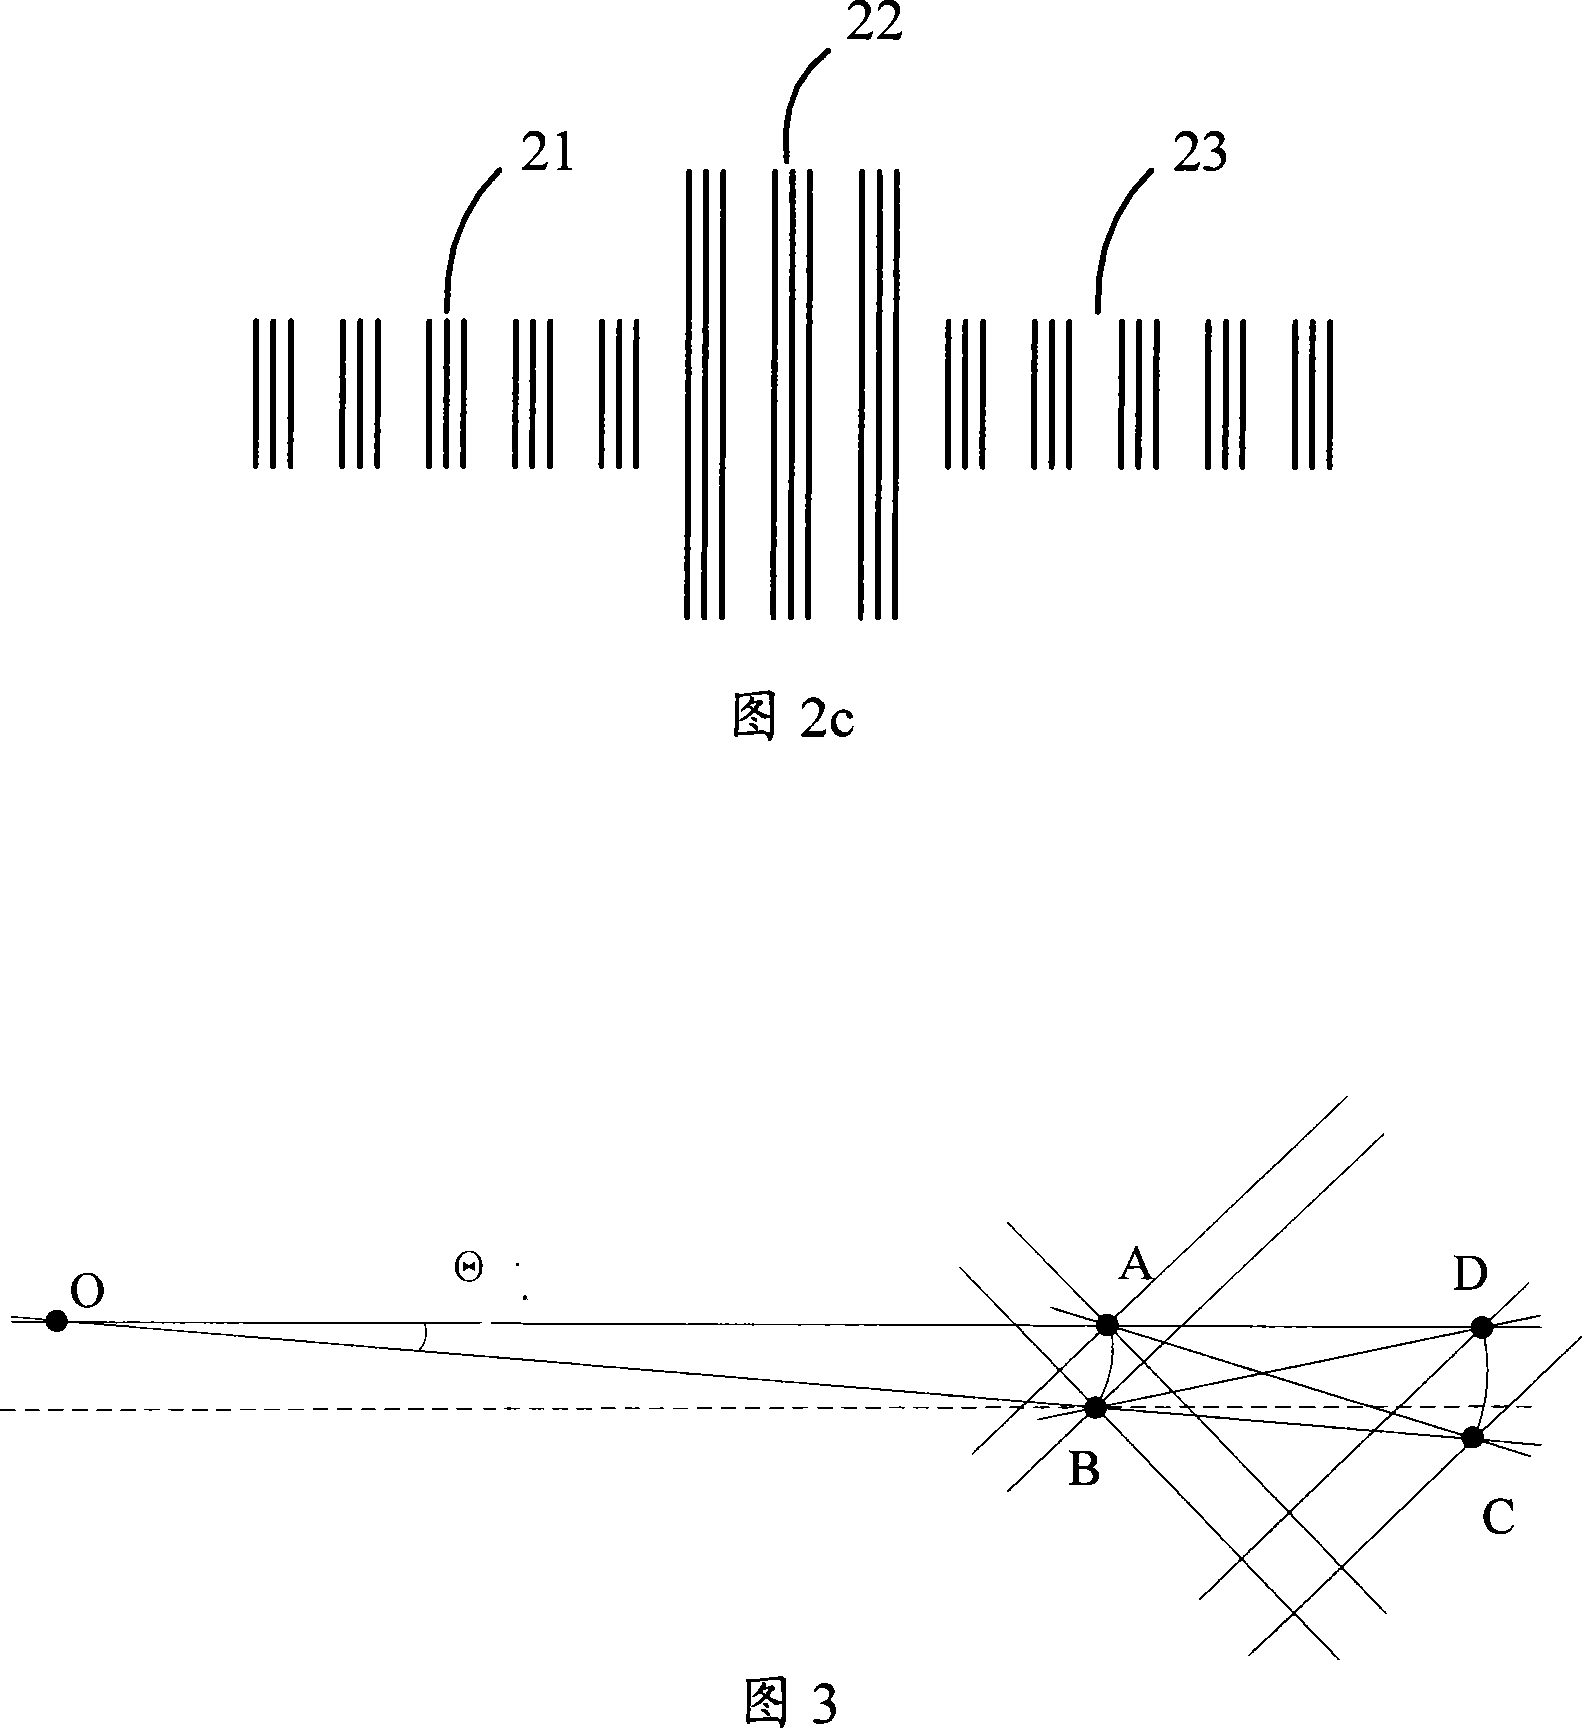 Mask alignment making and aligning used for light scribing device